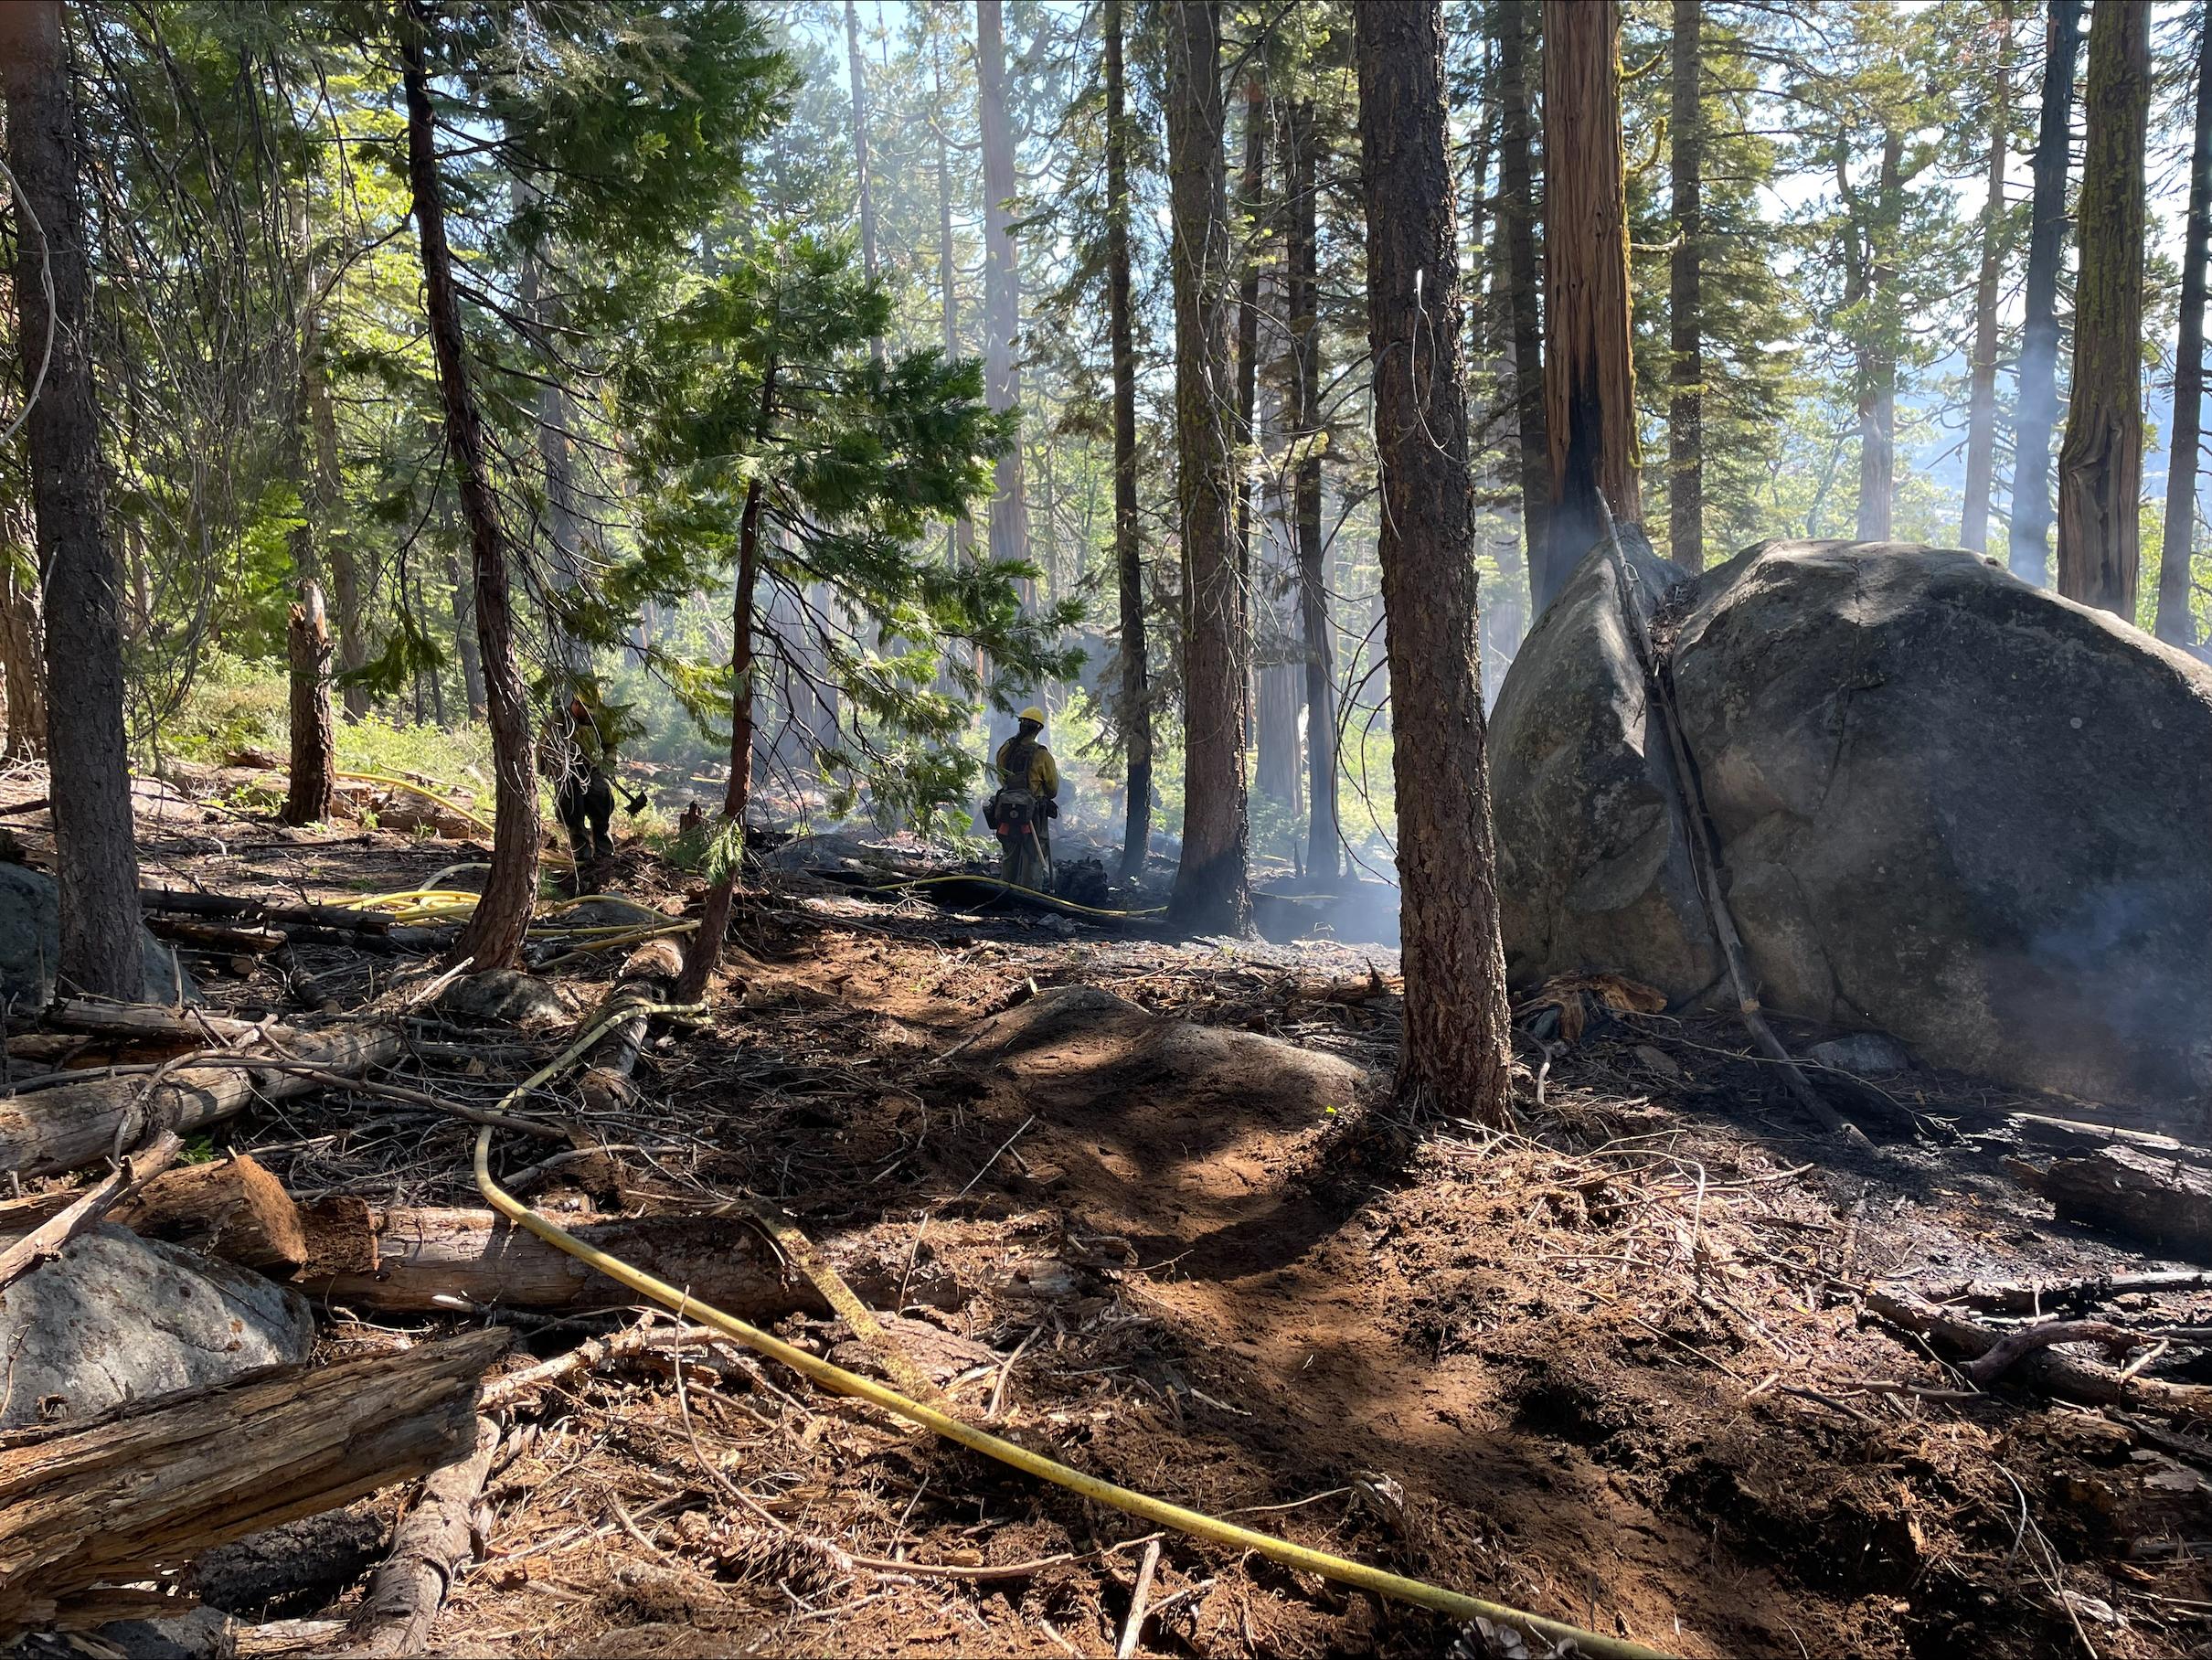 Firefighters working in a sparsely forested area.